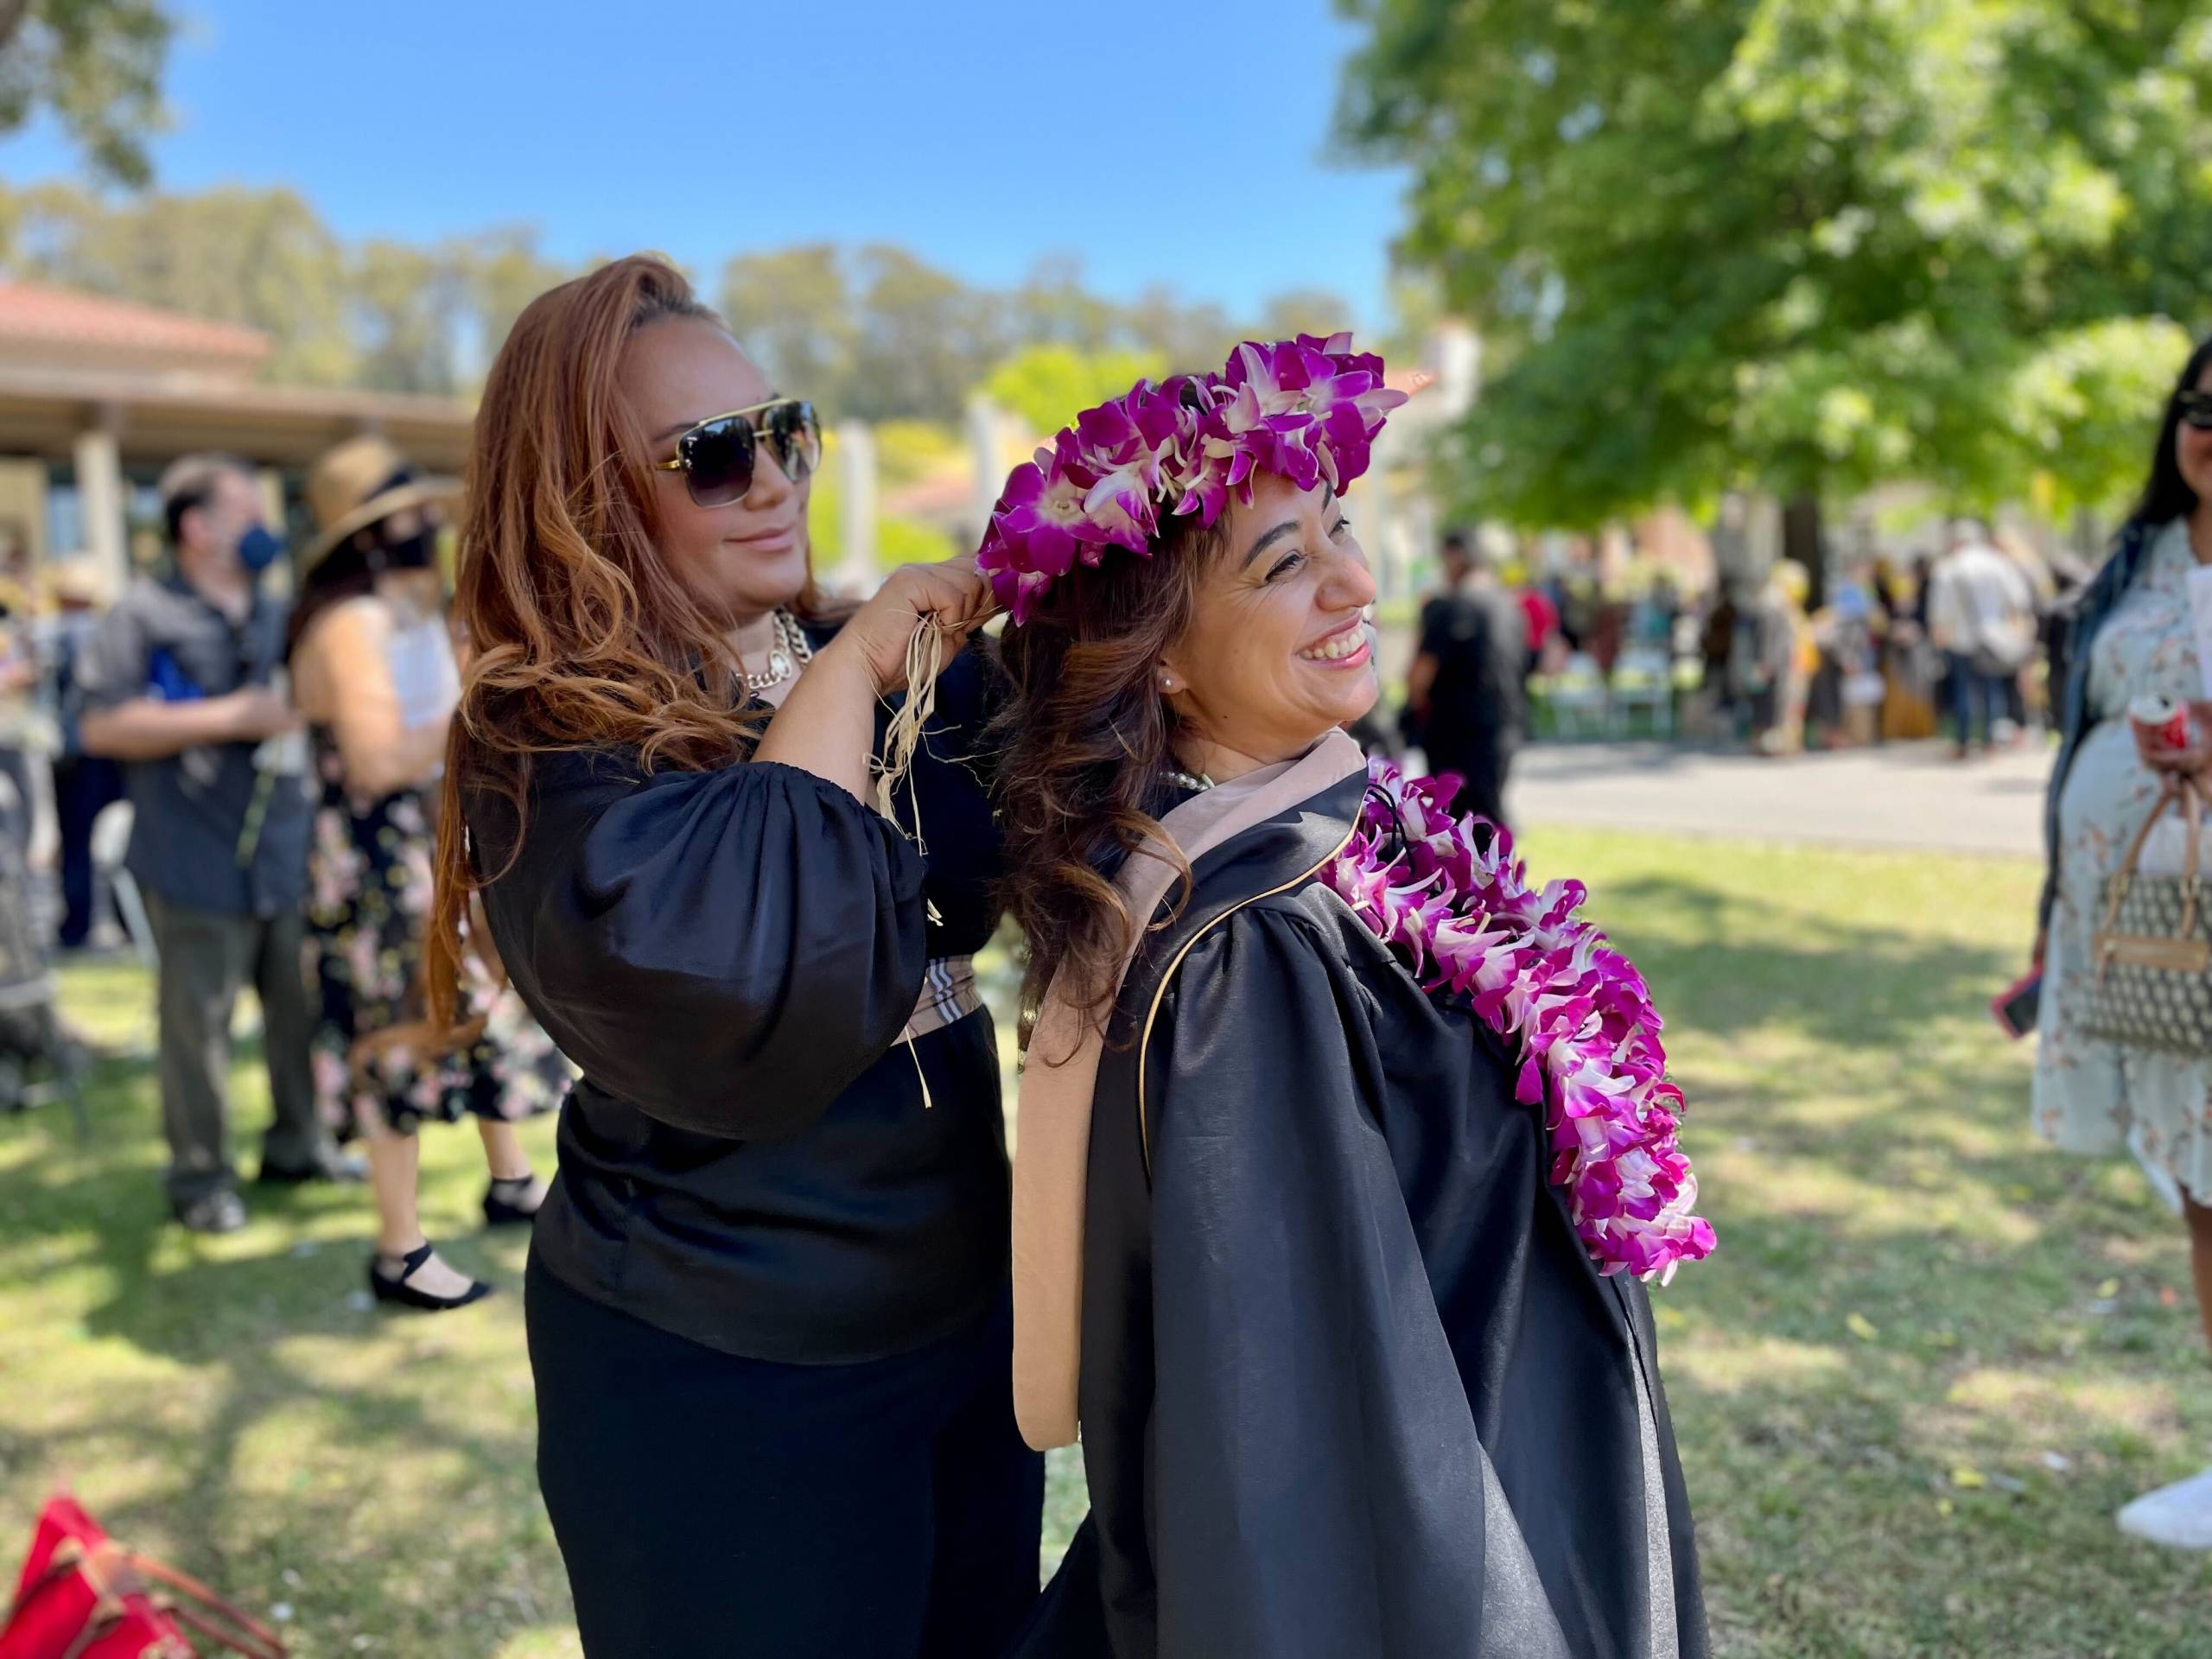 A woman ties a colorful purple lei onto another woman wearing a black graduation gown. A sunny day with clear sky and trees can be seen in the background.